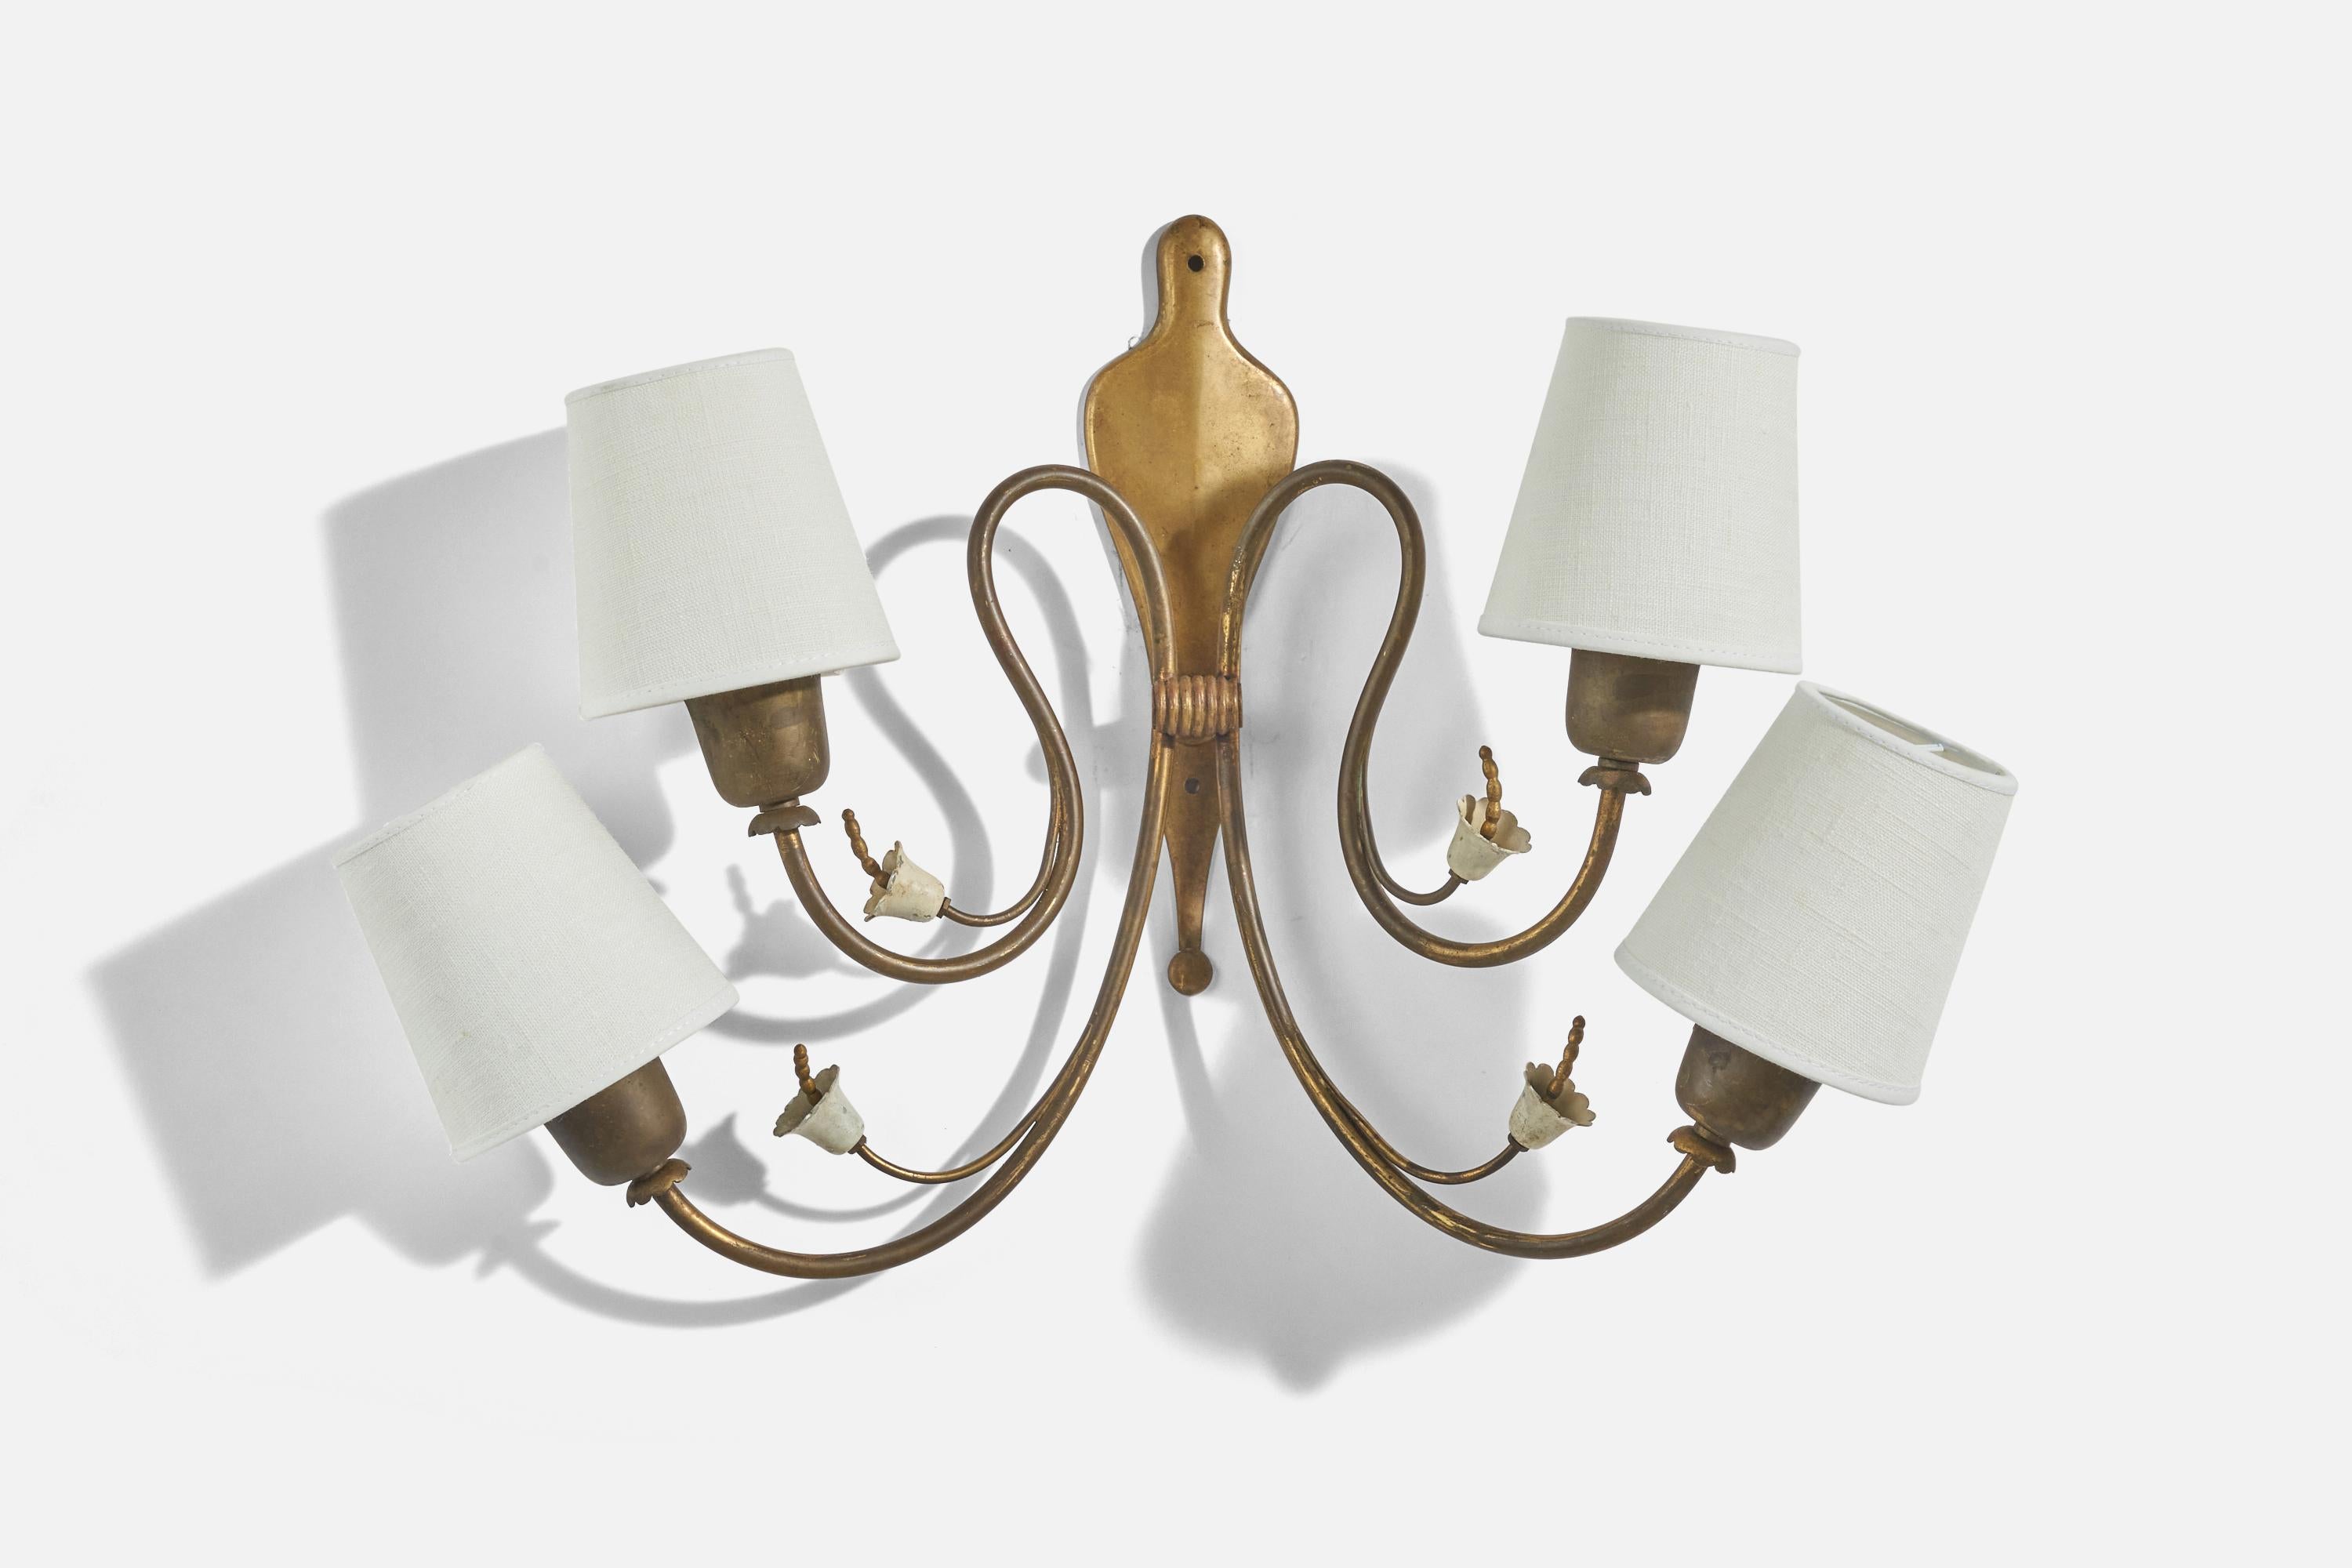 A brass and fabric sconce / wall light designed and produced by an Italian designer, Italy, 1940s.

Sold with Lampshades. Dimensions stated are of Sconce with Lampshades. 

Socket takes E-14 bulb.

There is no maximum wattage stated on the